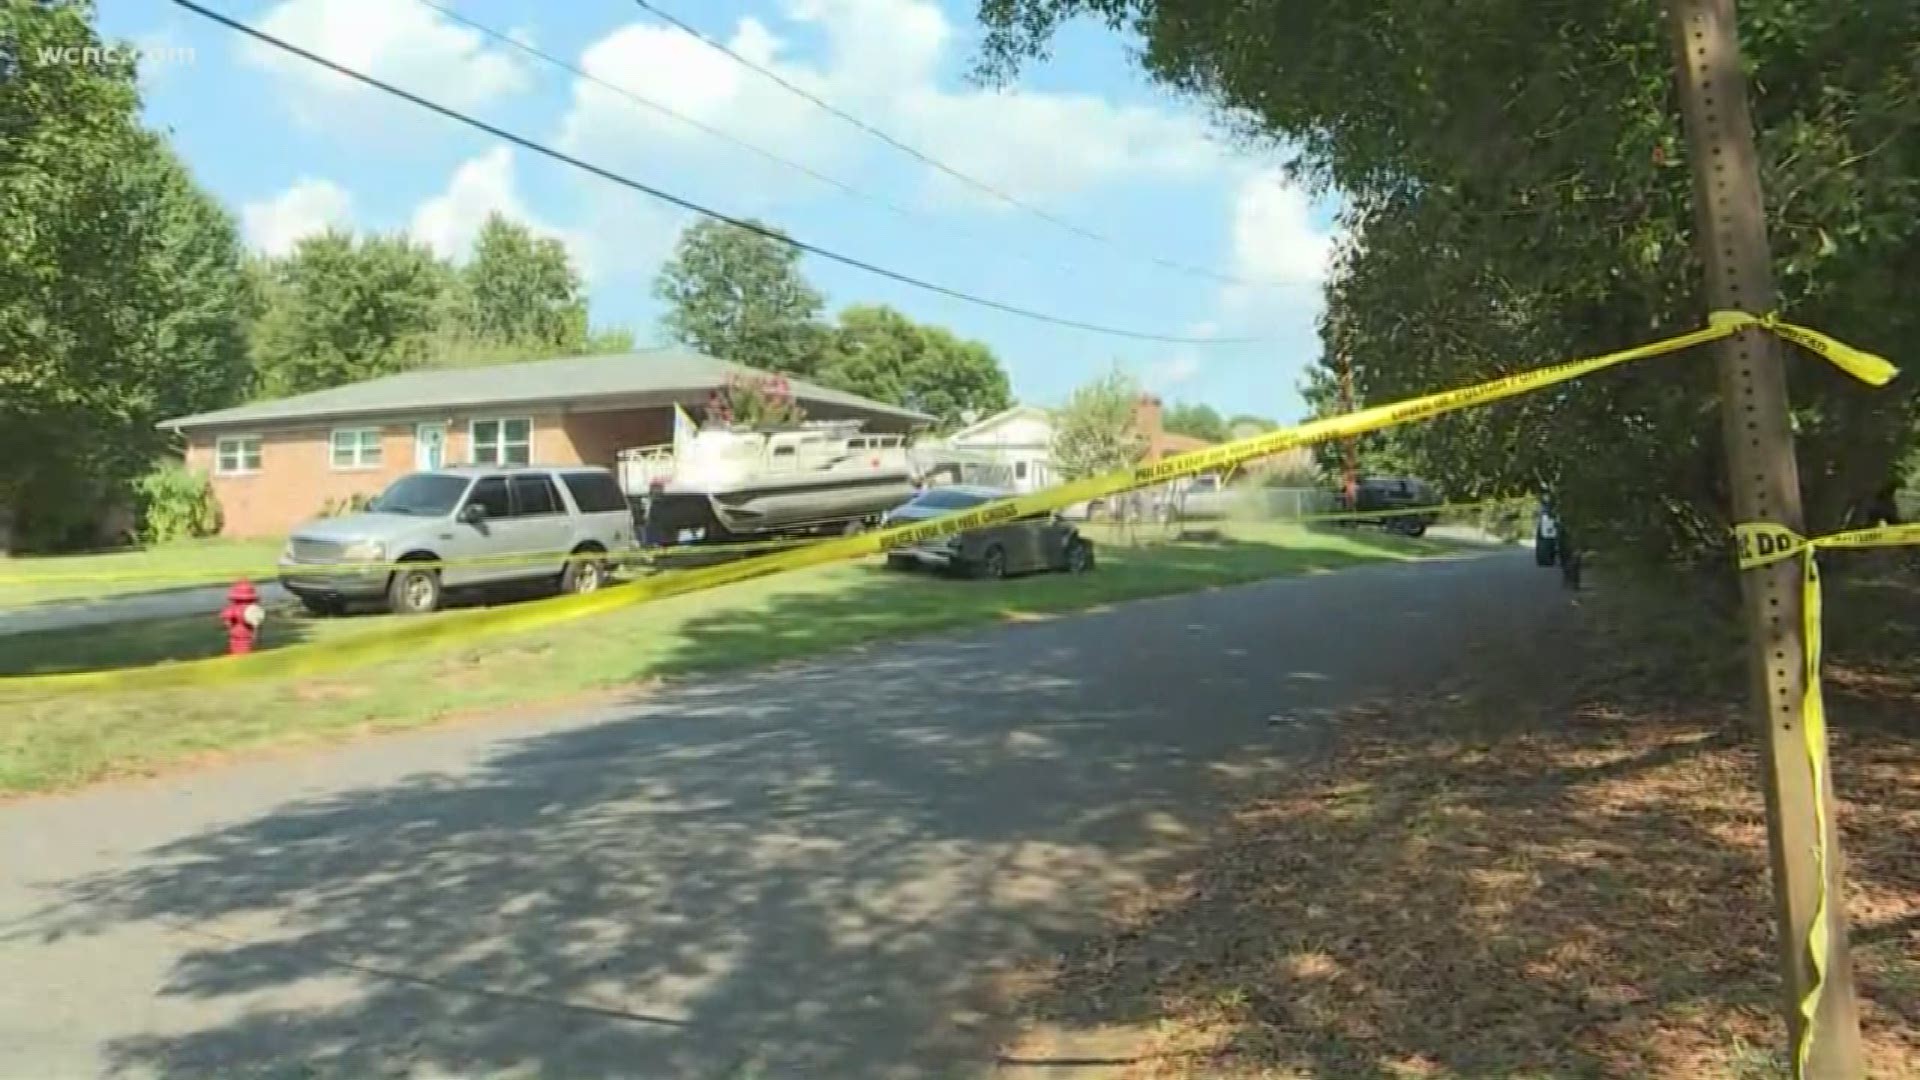 Police received a call saying someone had been stabbed 20 times at a house.